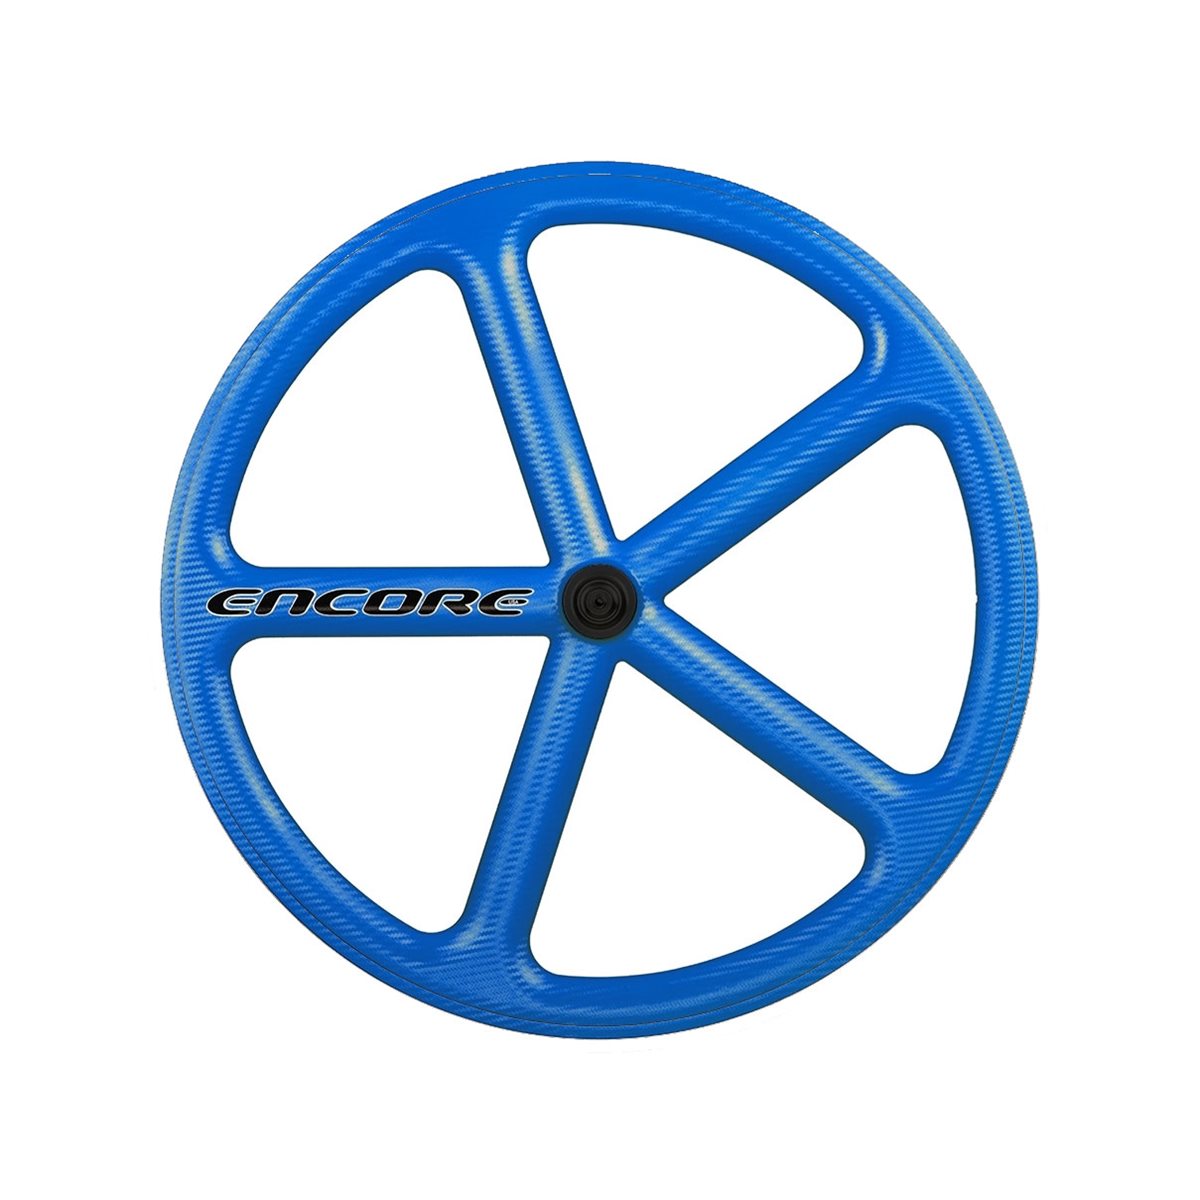 front wheel 700c track 5 spokes carbon weave blue nmsw